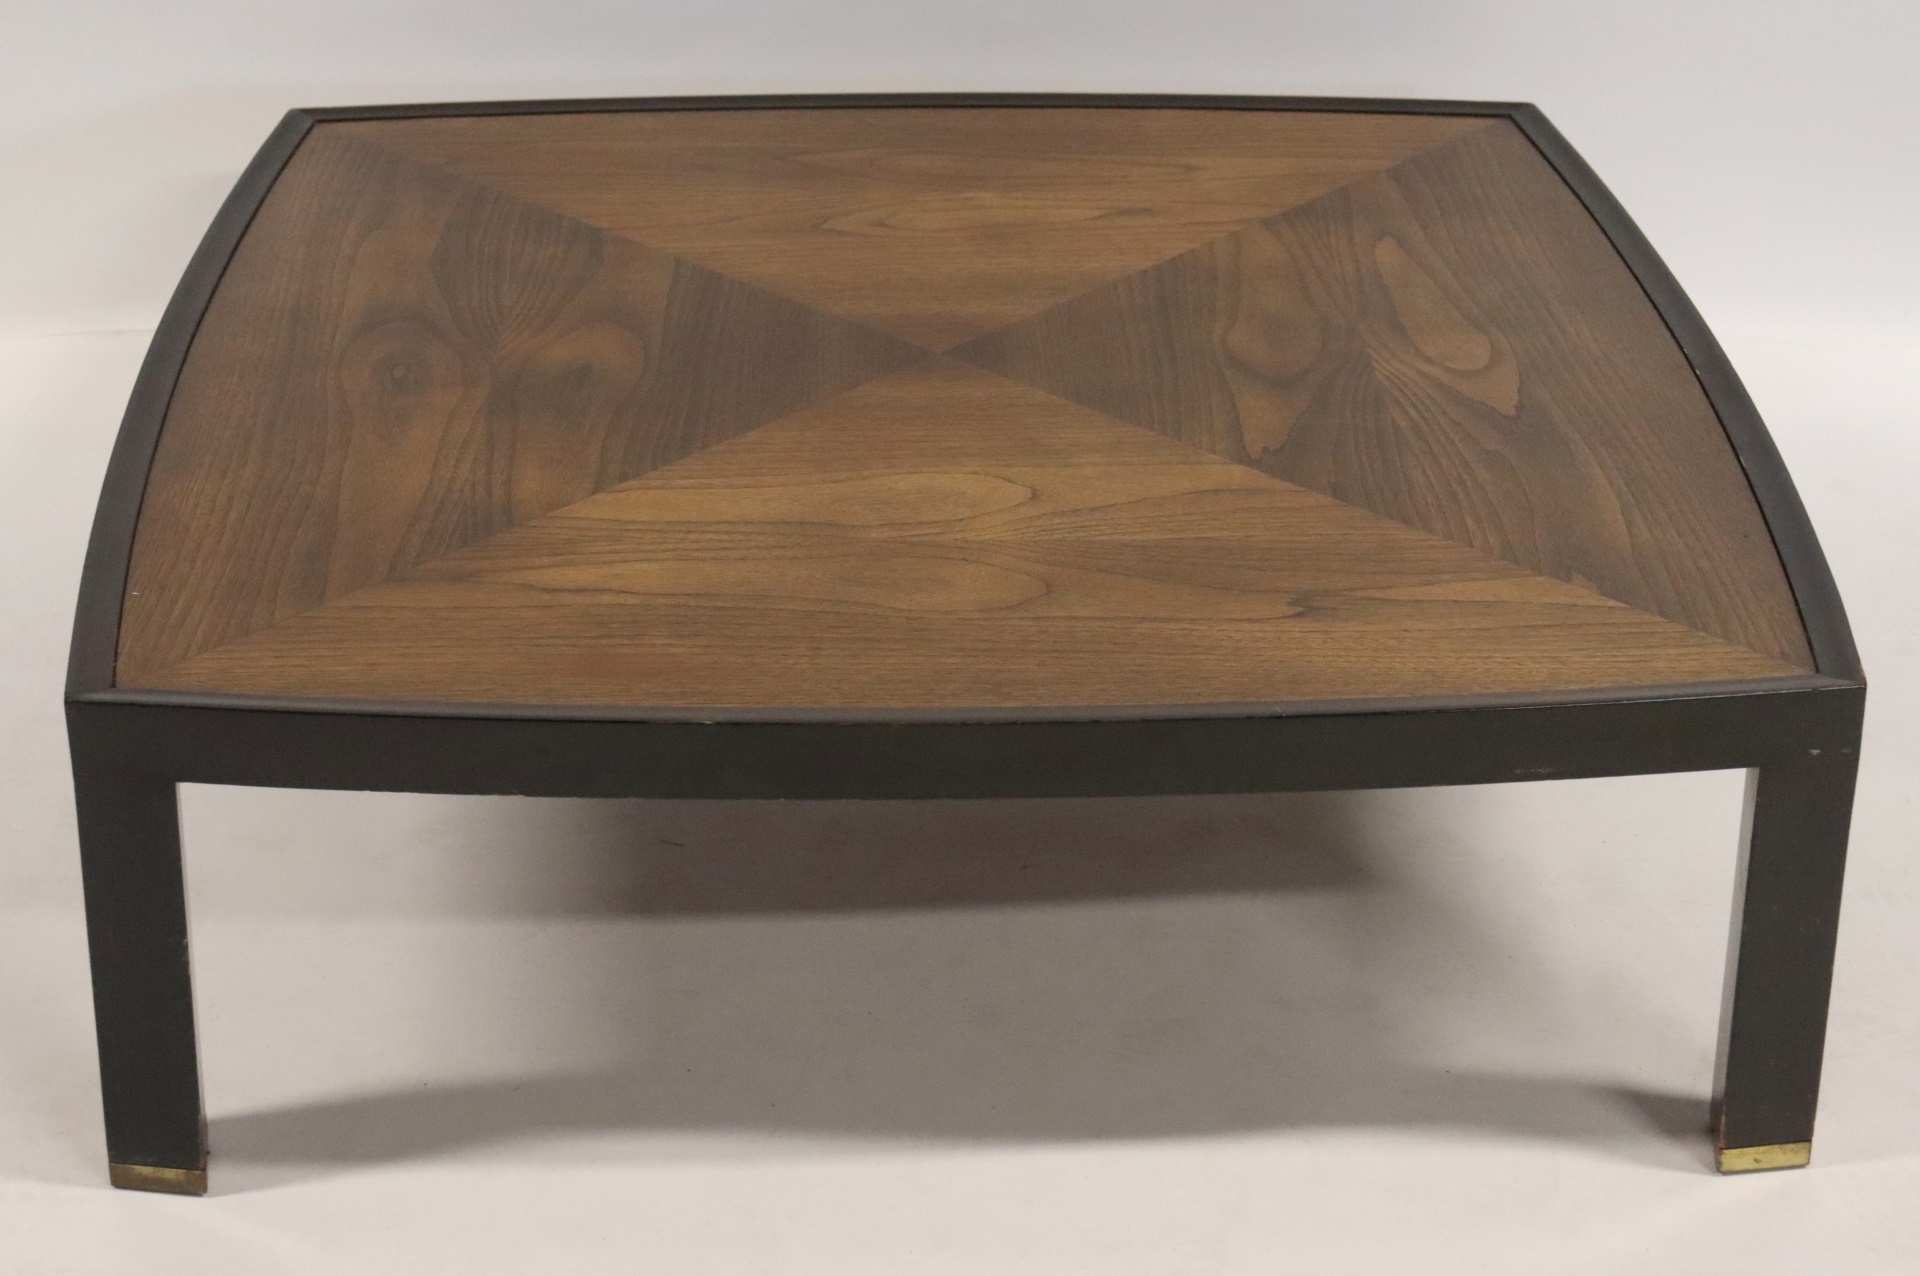 MIDCENTURY BANDED COFFEE TABLE